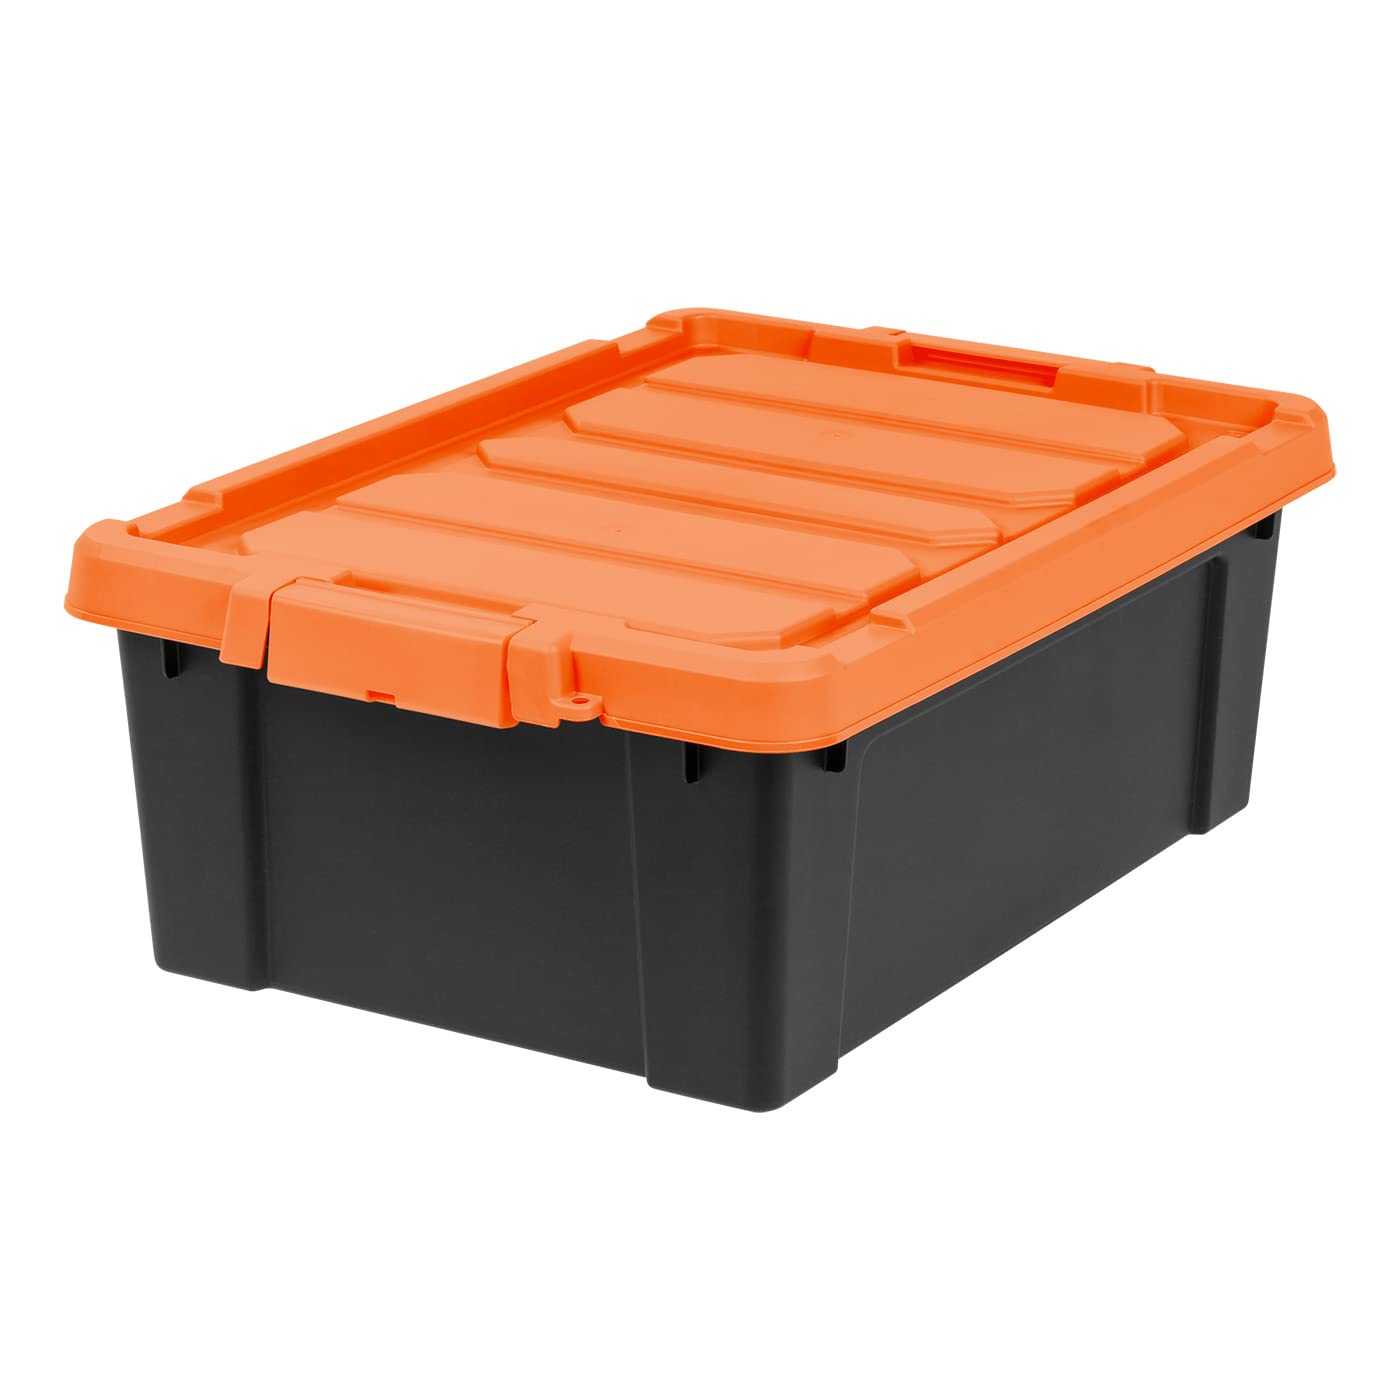 IRIS USA 11.75 Gallon Heavy-Duty Plastic Storage Bins, 2 Pack, Store-It-All Container Totes with Durable Lid and Secure Latching Buckles, Garage and Metal Rack Organizing, Black/Orange